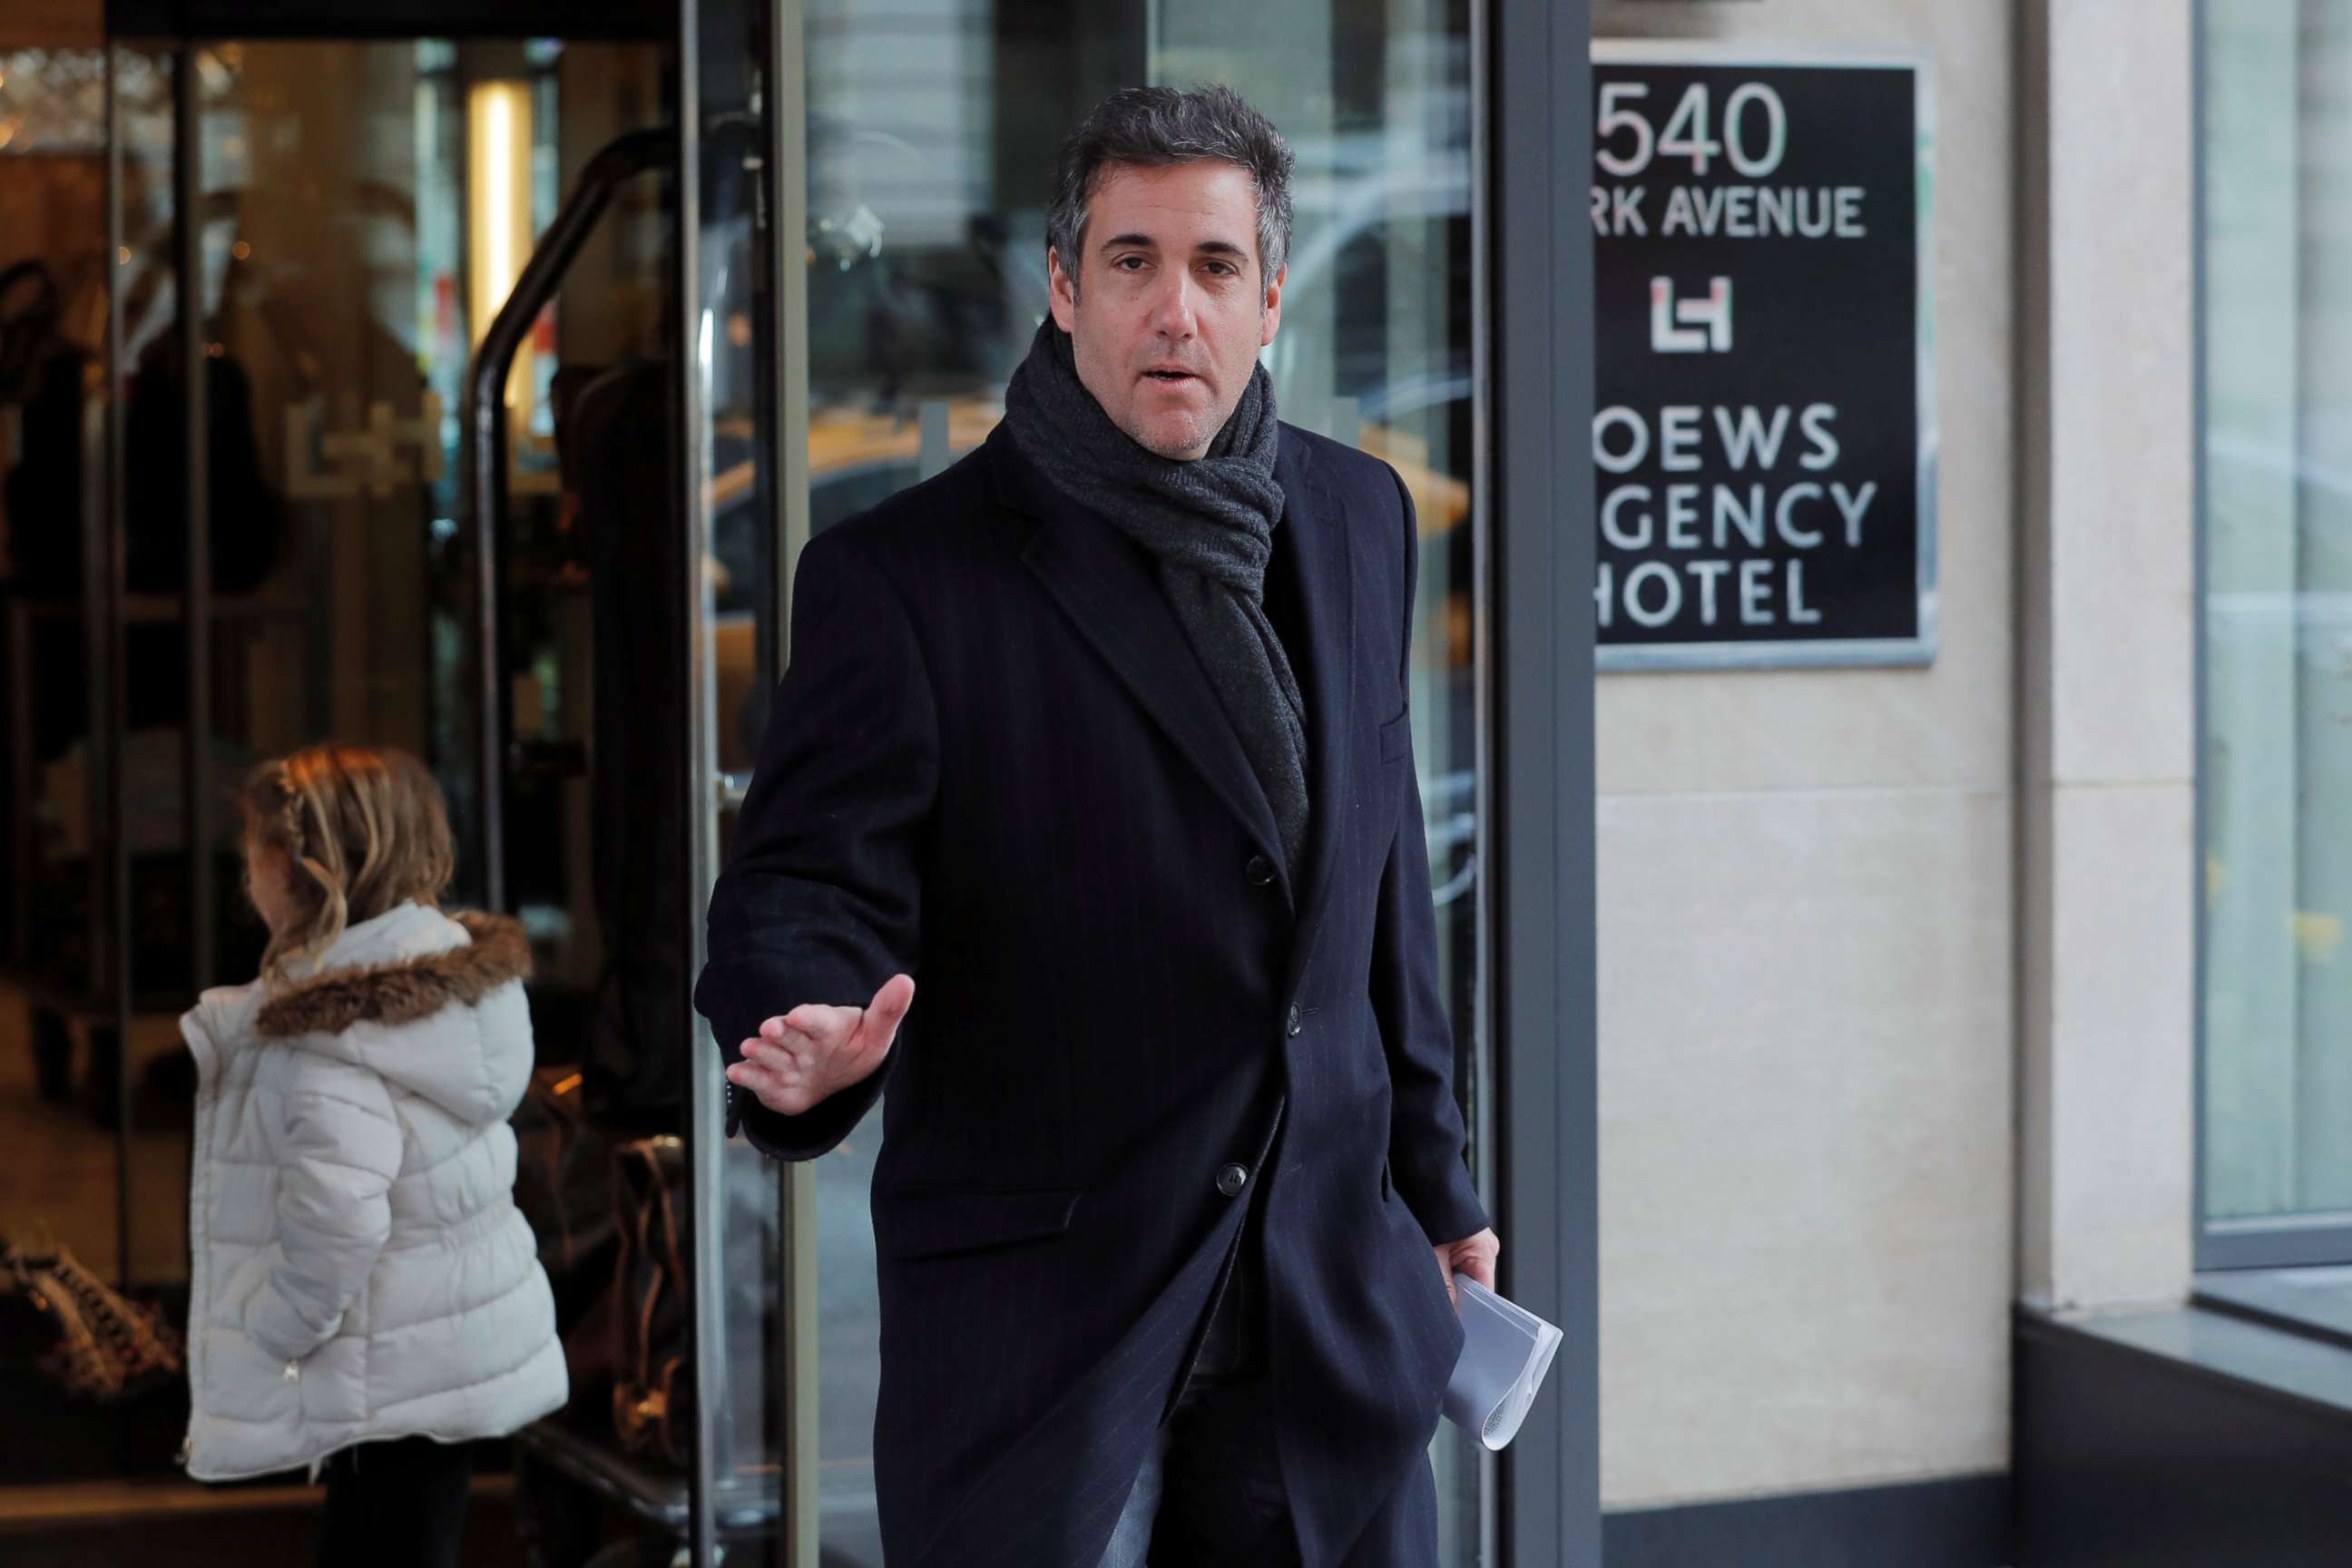 PHOTO: Donald Trump's personal lawyer Michael Cohen exits a hotel in New York City, April 15, 2018.